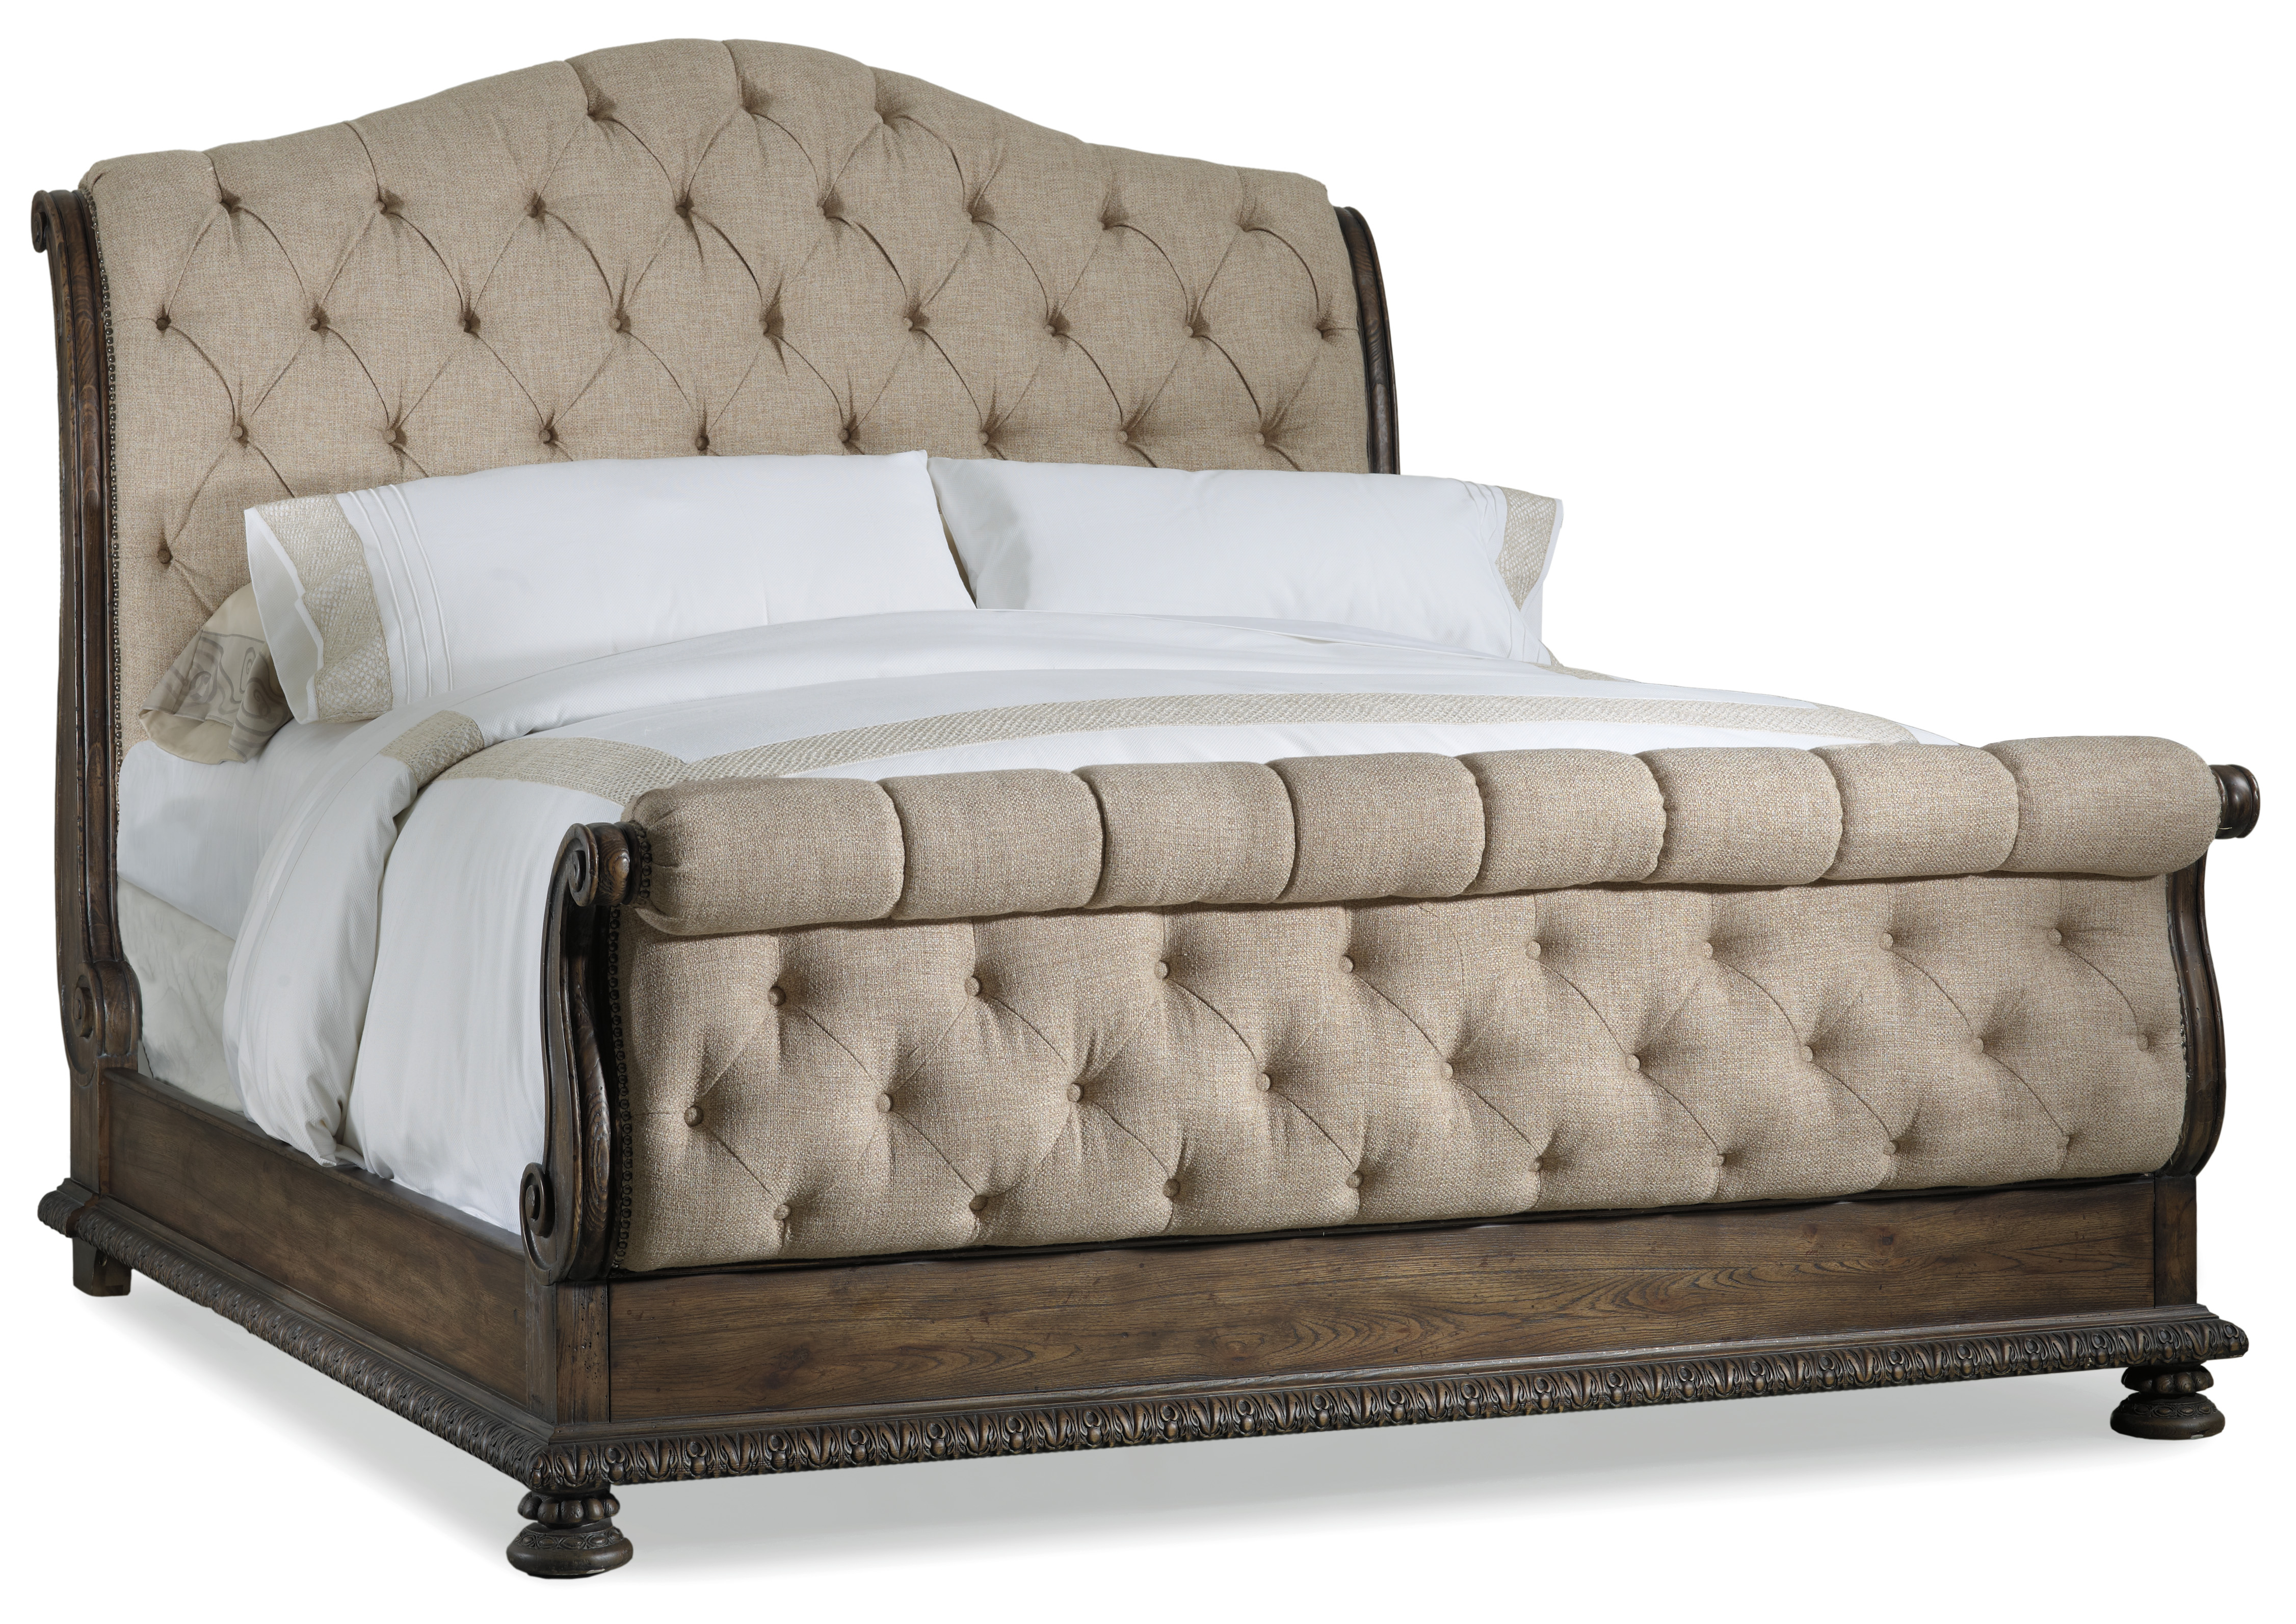 Picture of Tufted Bed 6